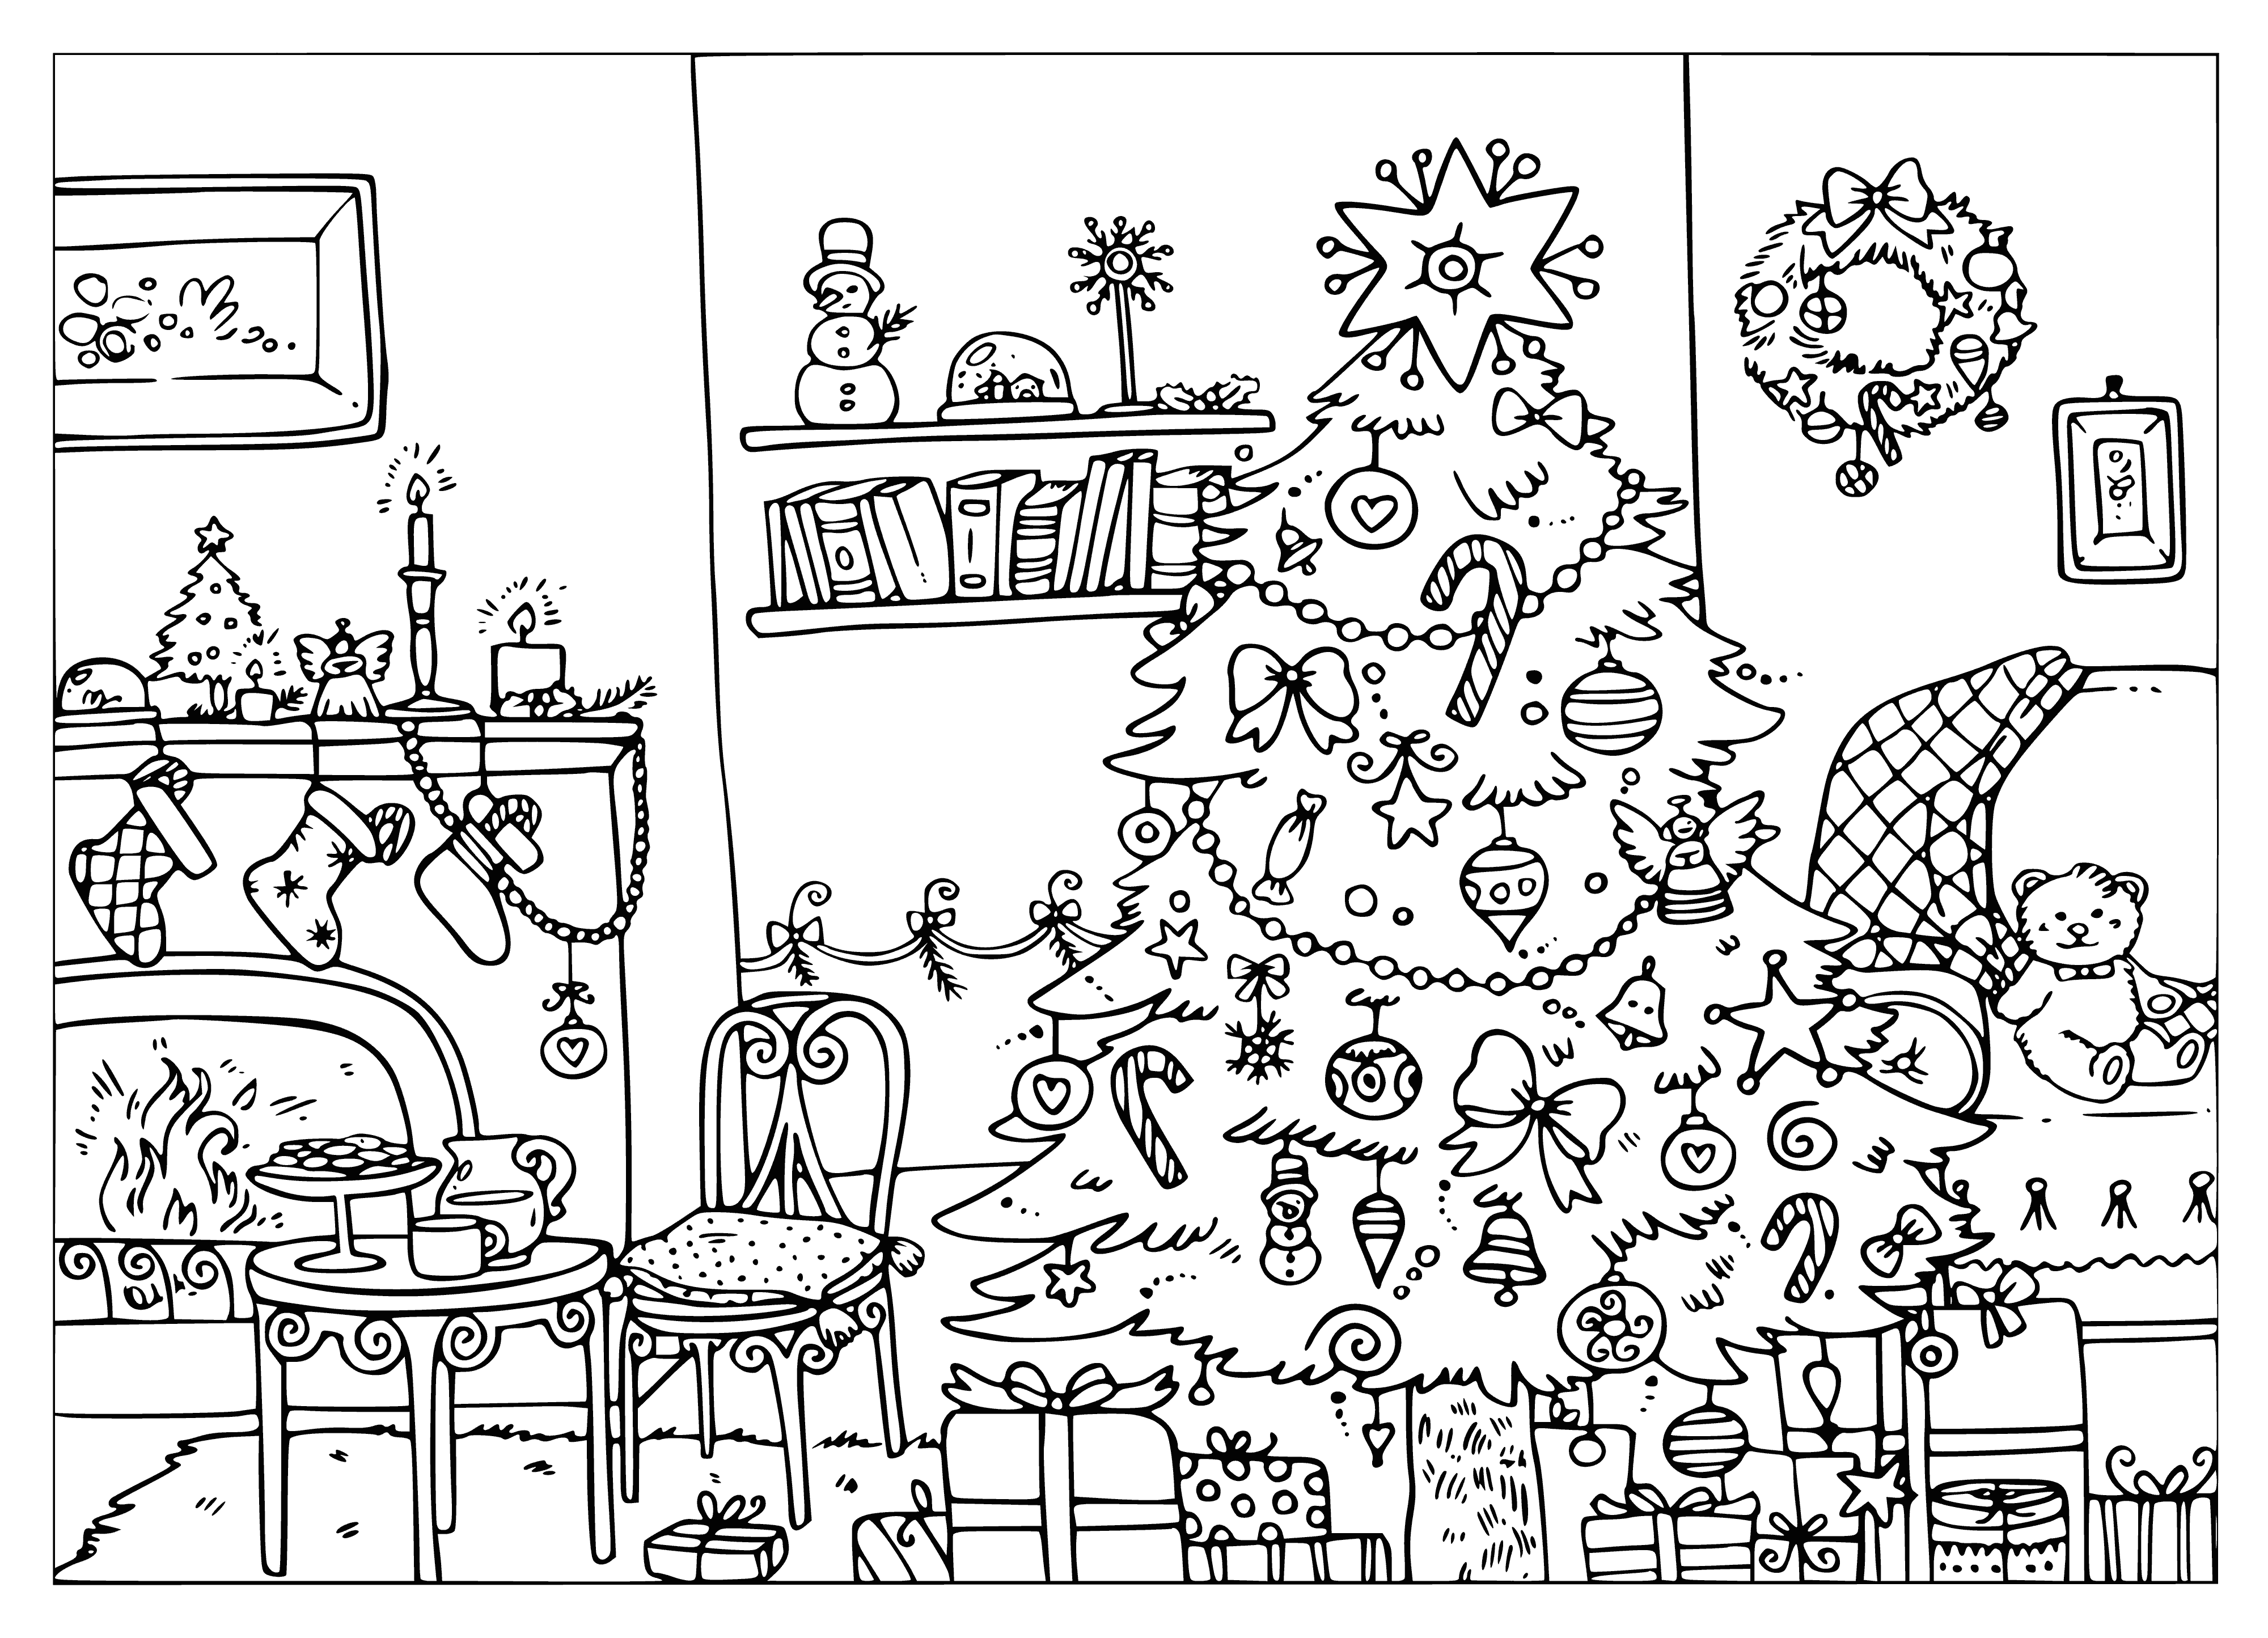 coloring page: Coloring page of a Christmas tree: green w/brn trunk, yellow/red bulbs, & a blue star on top. #Christmas #Coloring #FamilyFun